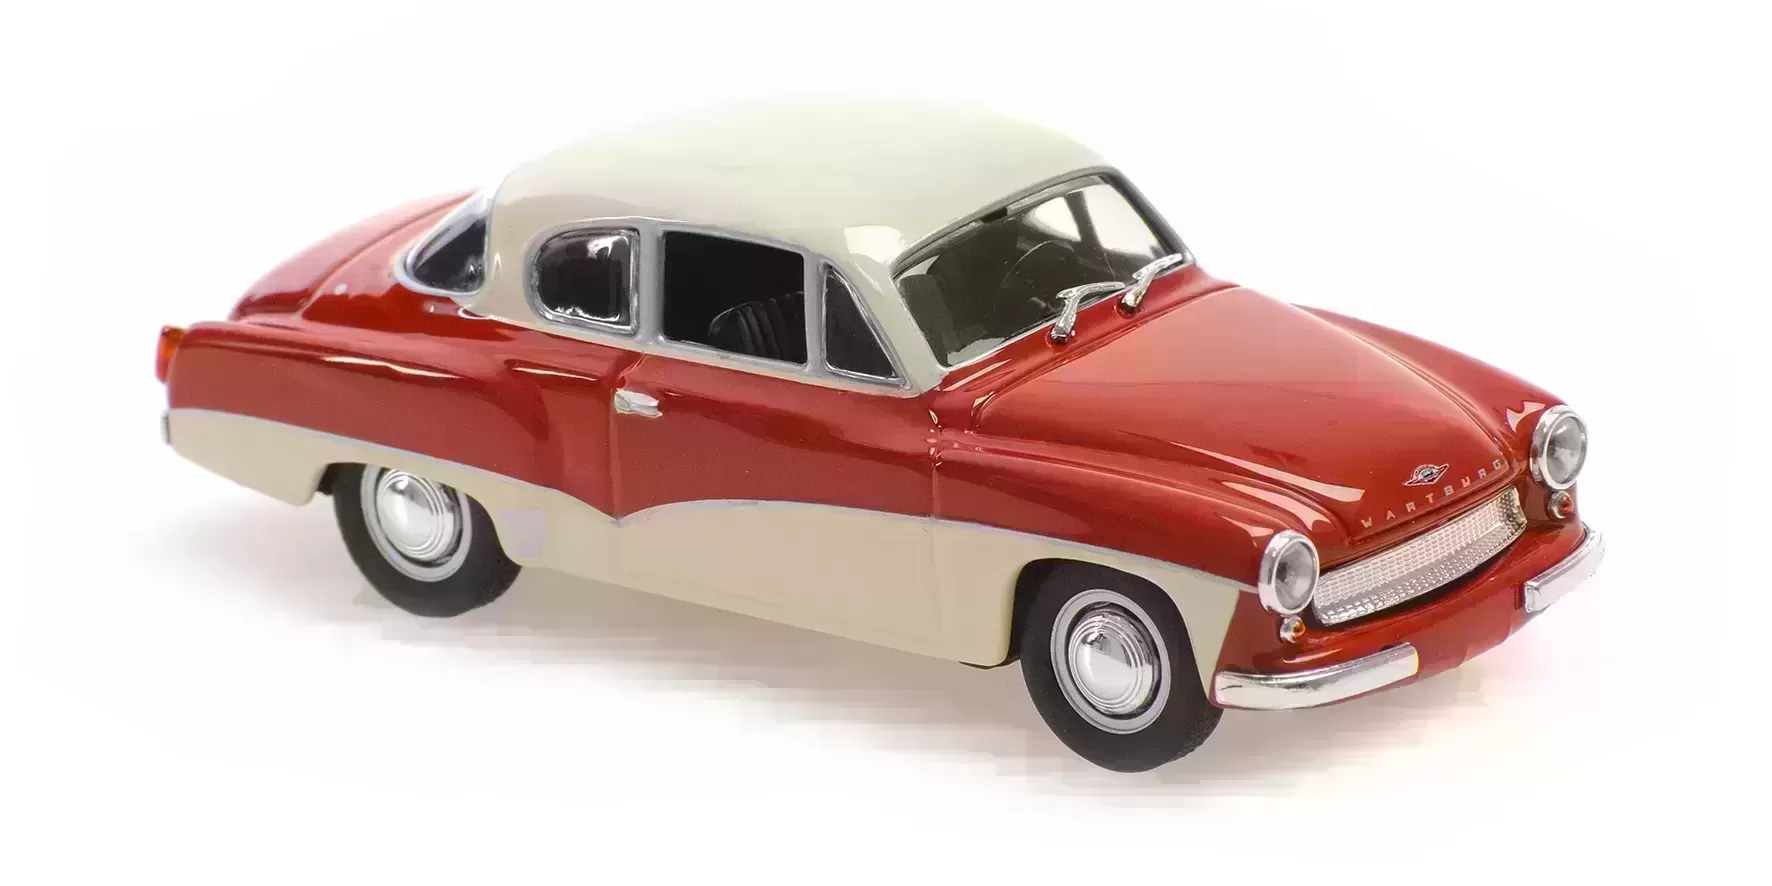 Wartburg A311 Coupe 1958 Rood/Wit - 1:43